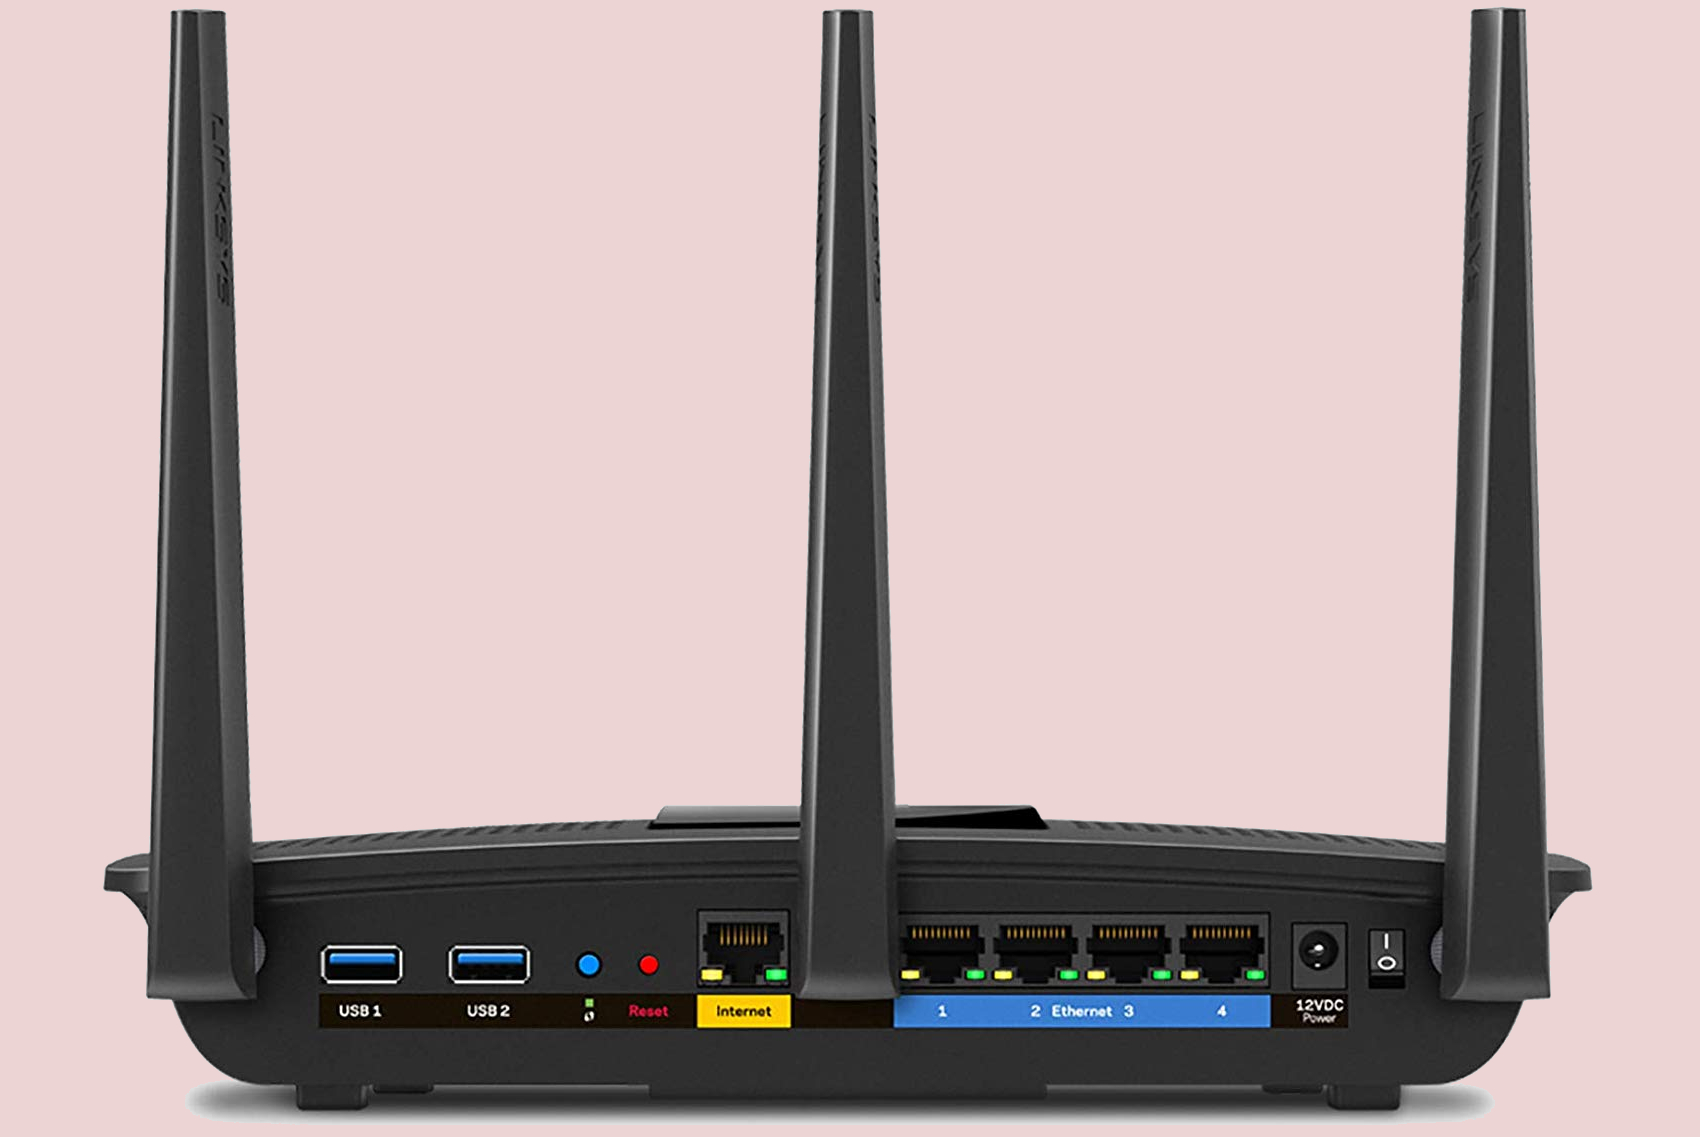 amazon slashes prices on linksys dual band and tri mesh wi fi routers the router 02  1 2